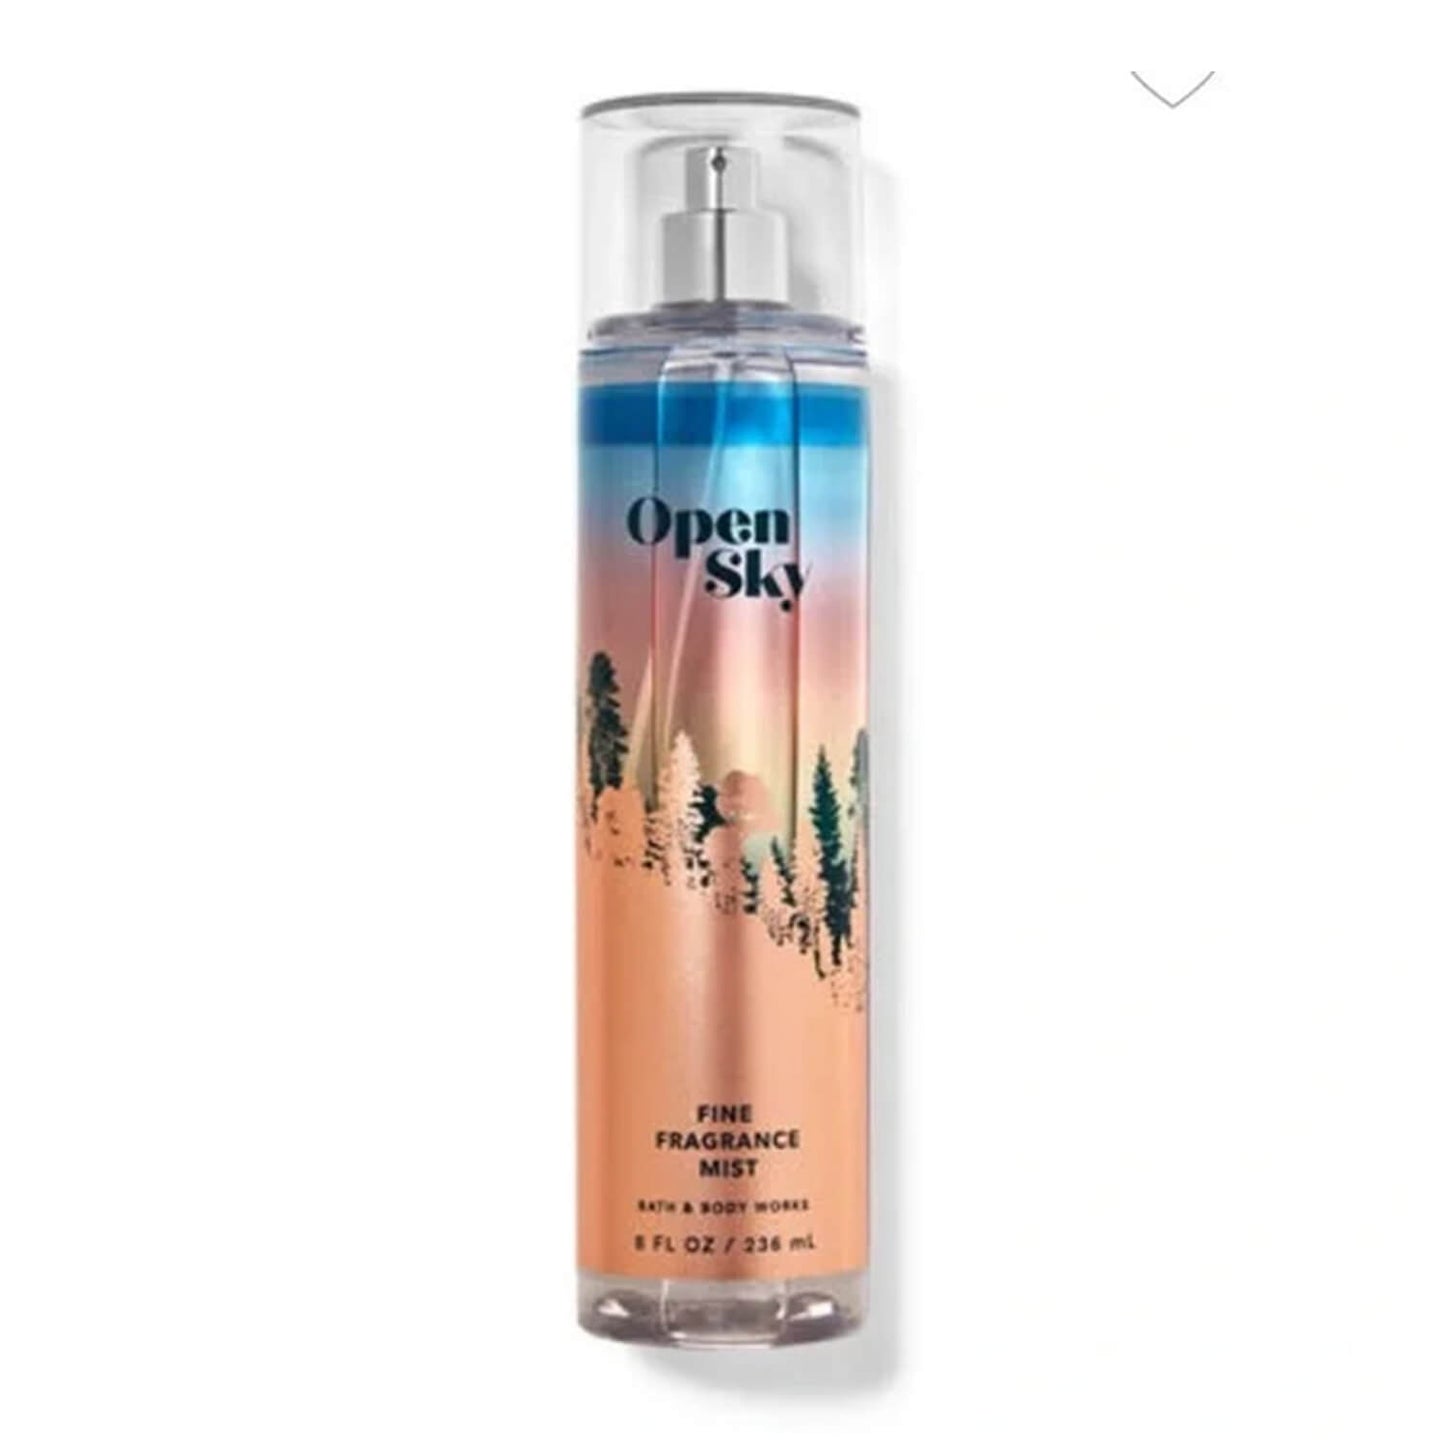 Shop 100% original Bath and Body Works mist in Open Sky fragrance available at Heygirl.pk for delivery in Pakistan